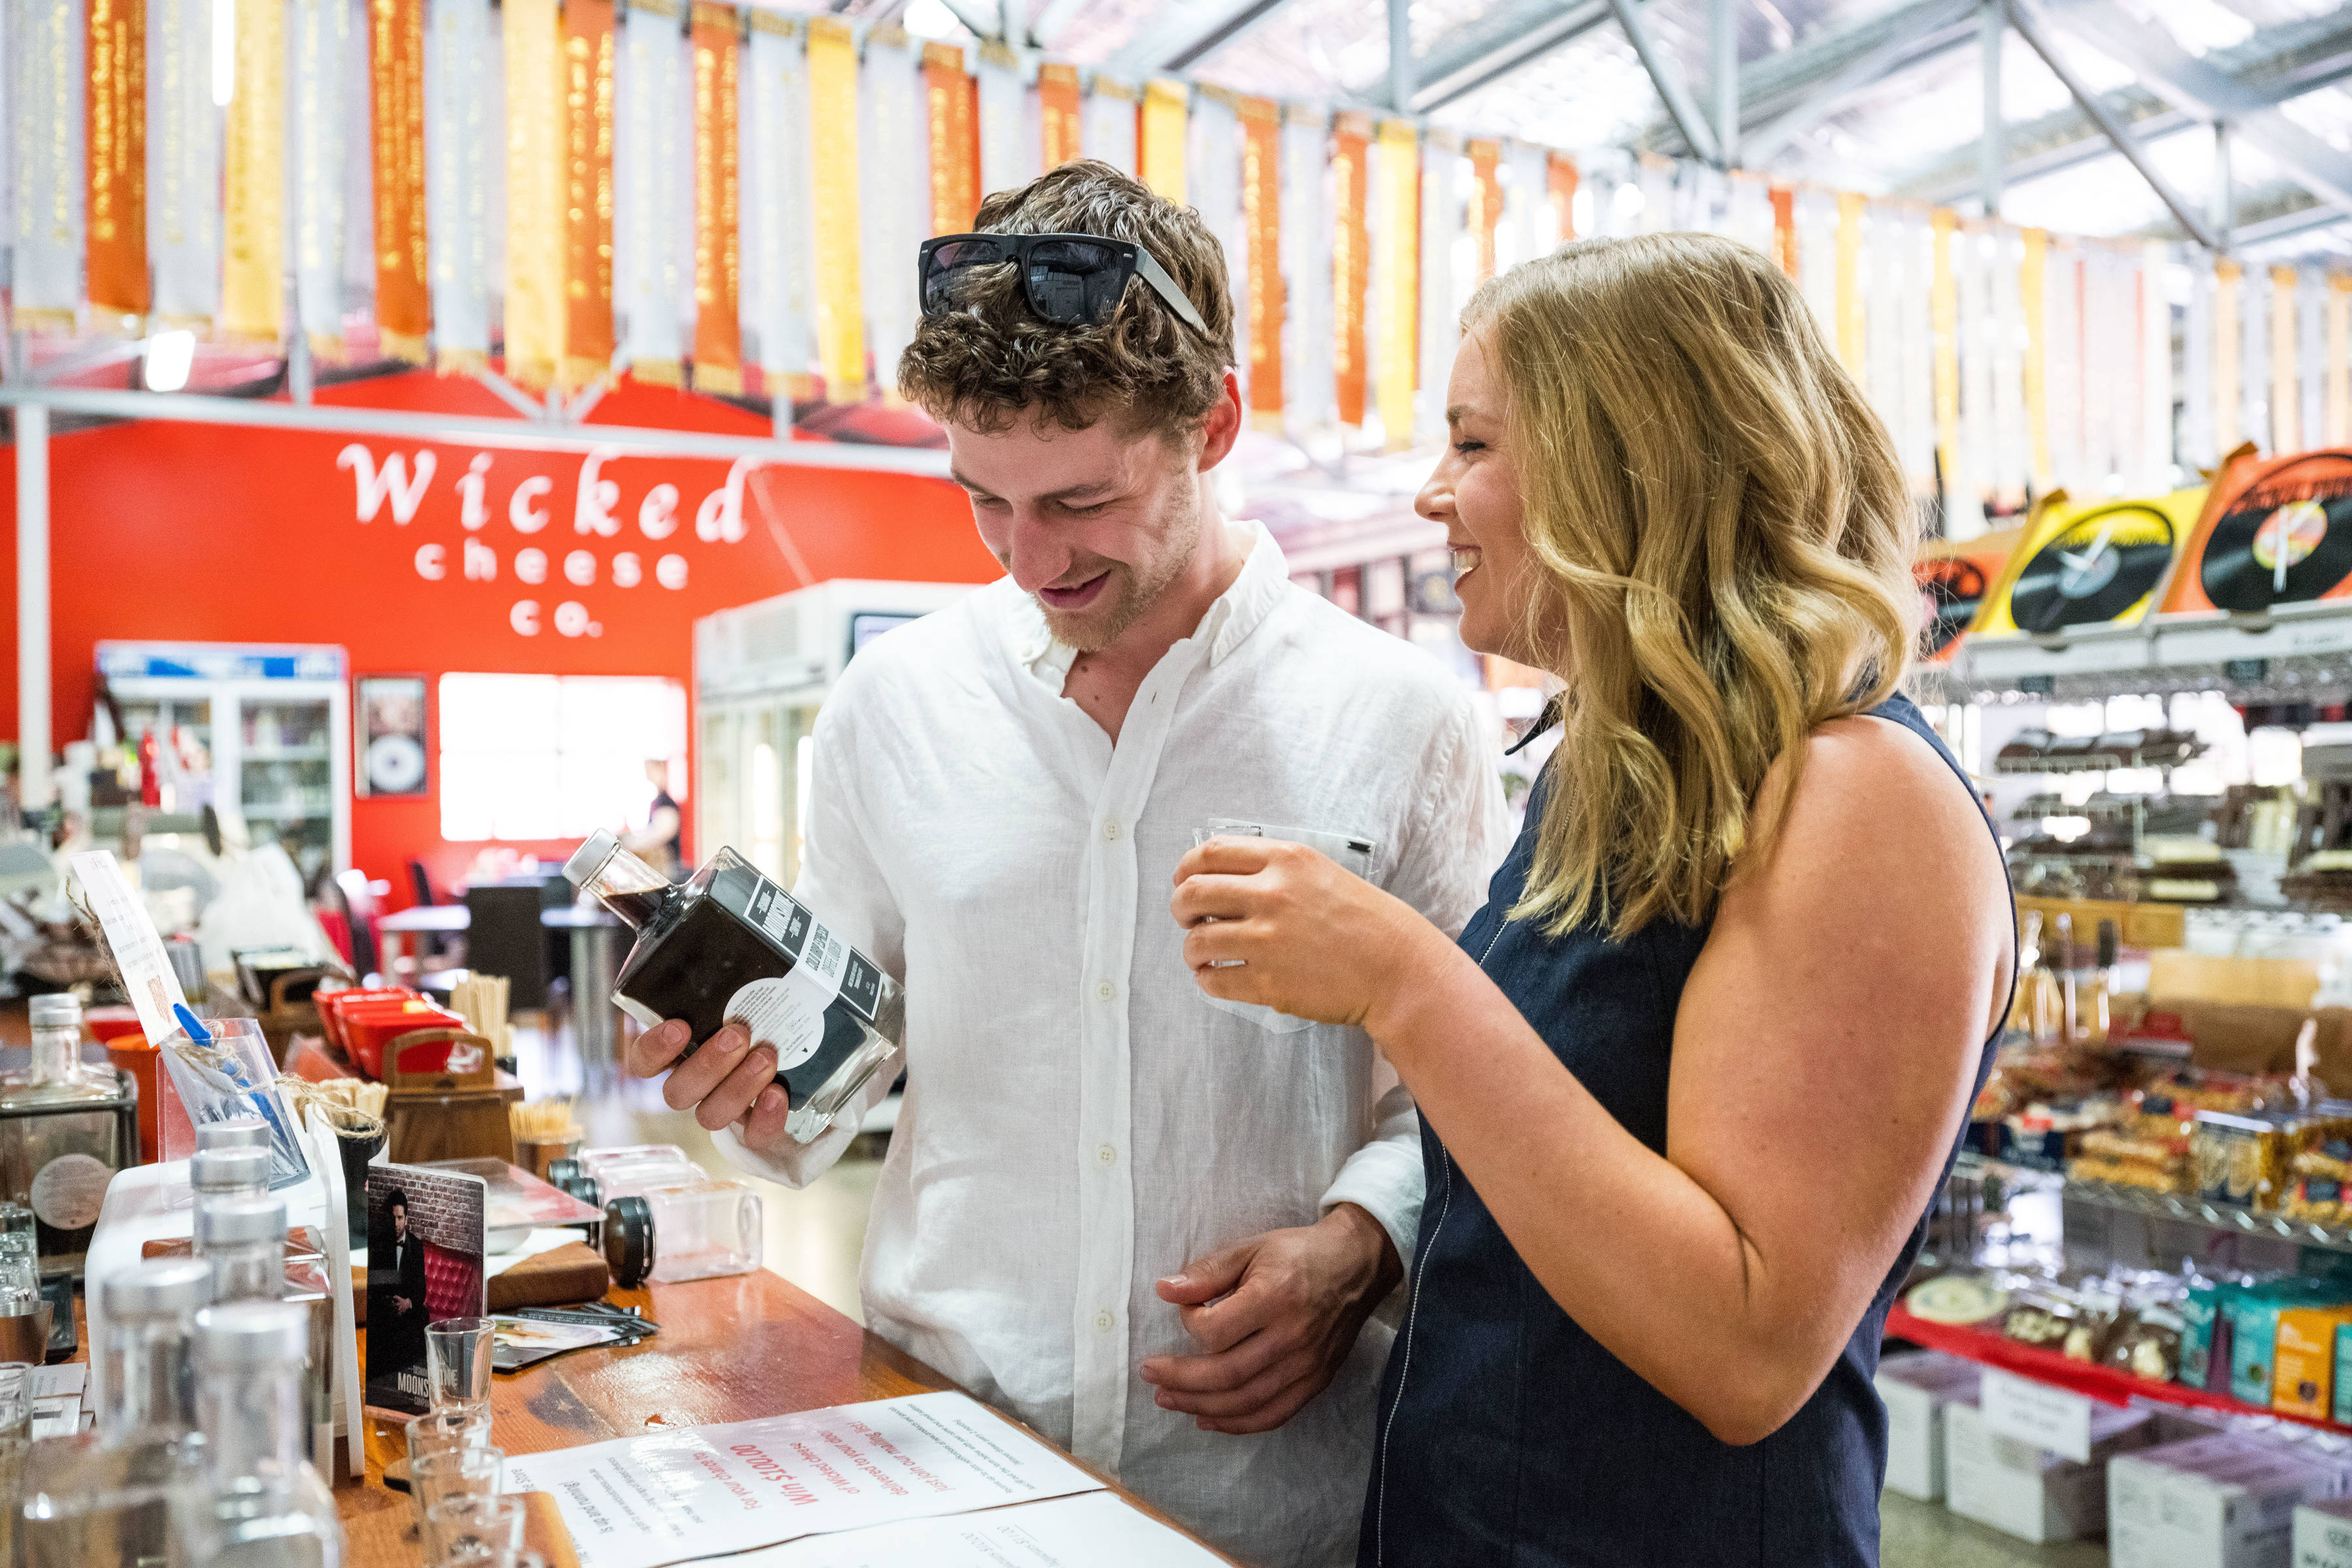 A man and a woman inside the Wicked Cheese shop. The man is reading the label on a bottle of cold drop espresso coffee liqueur and the woman is tasting a sample.